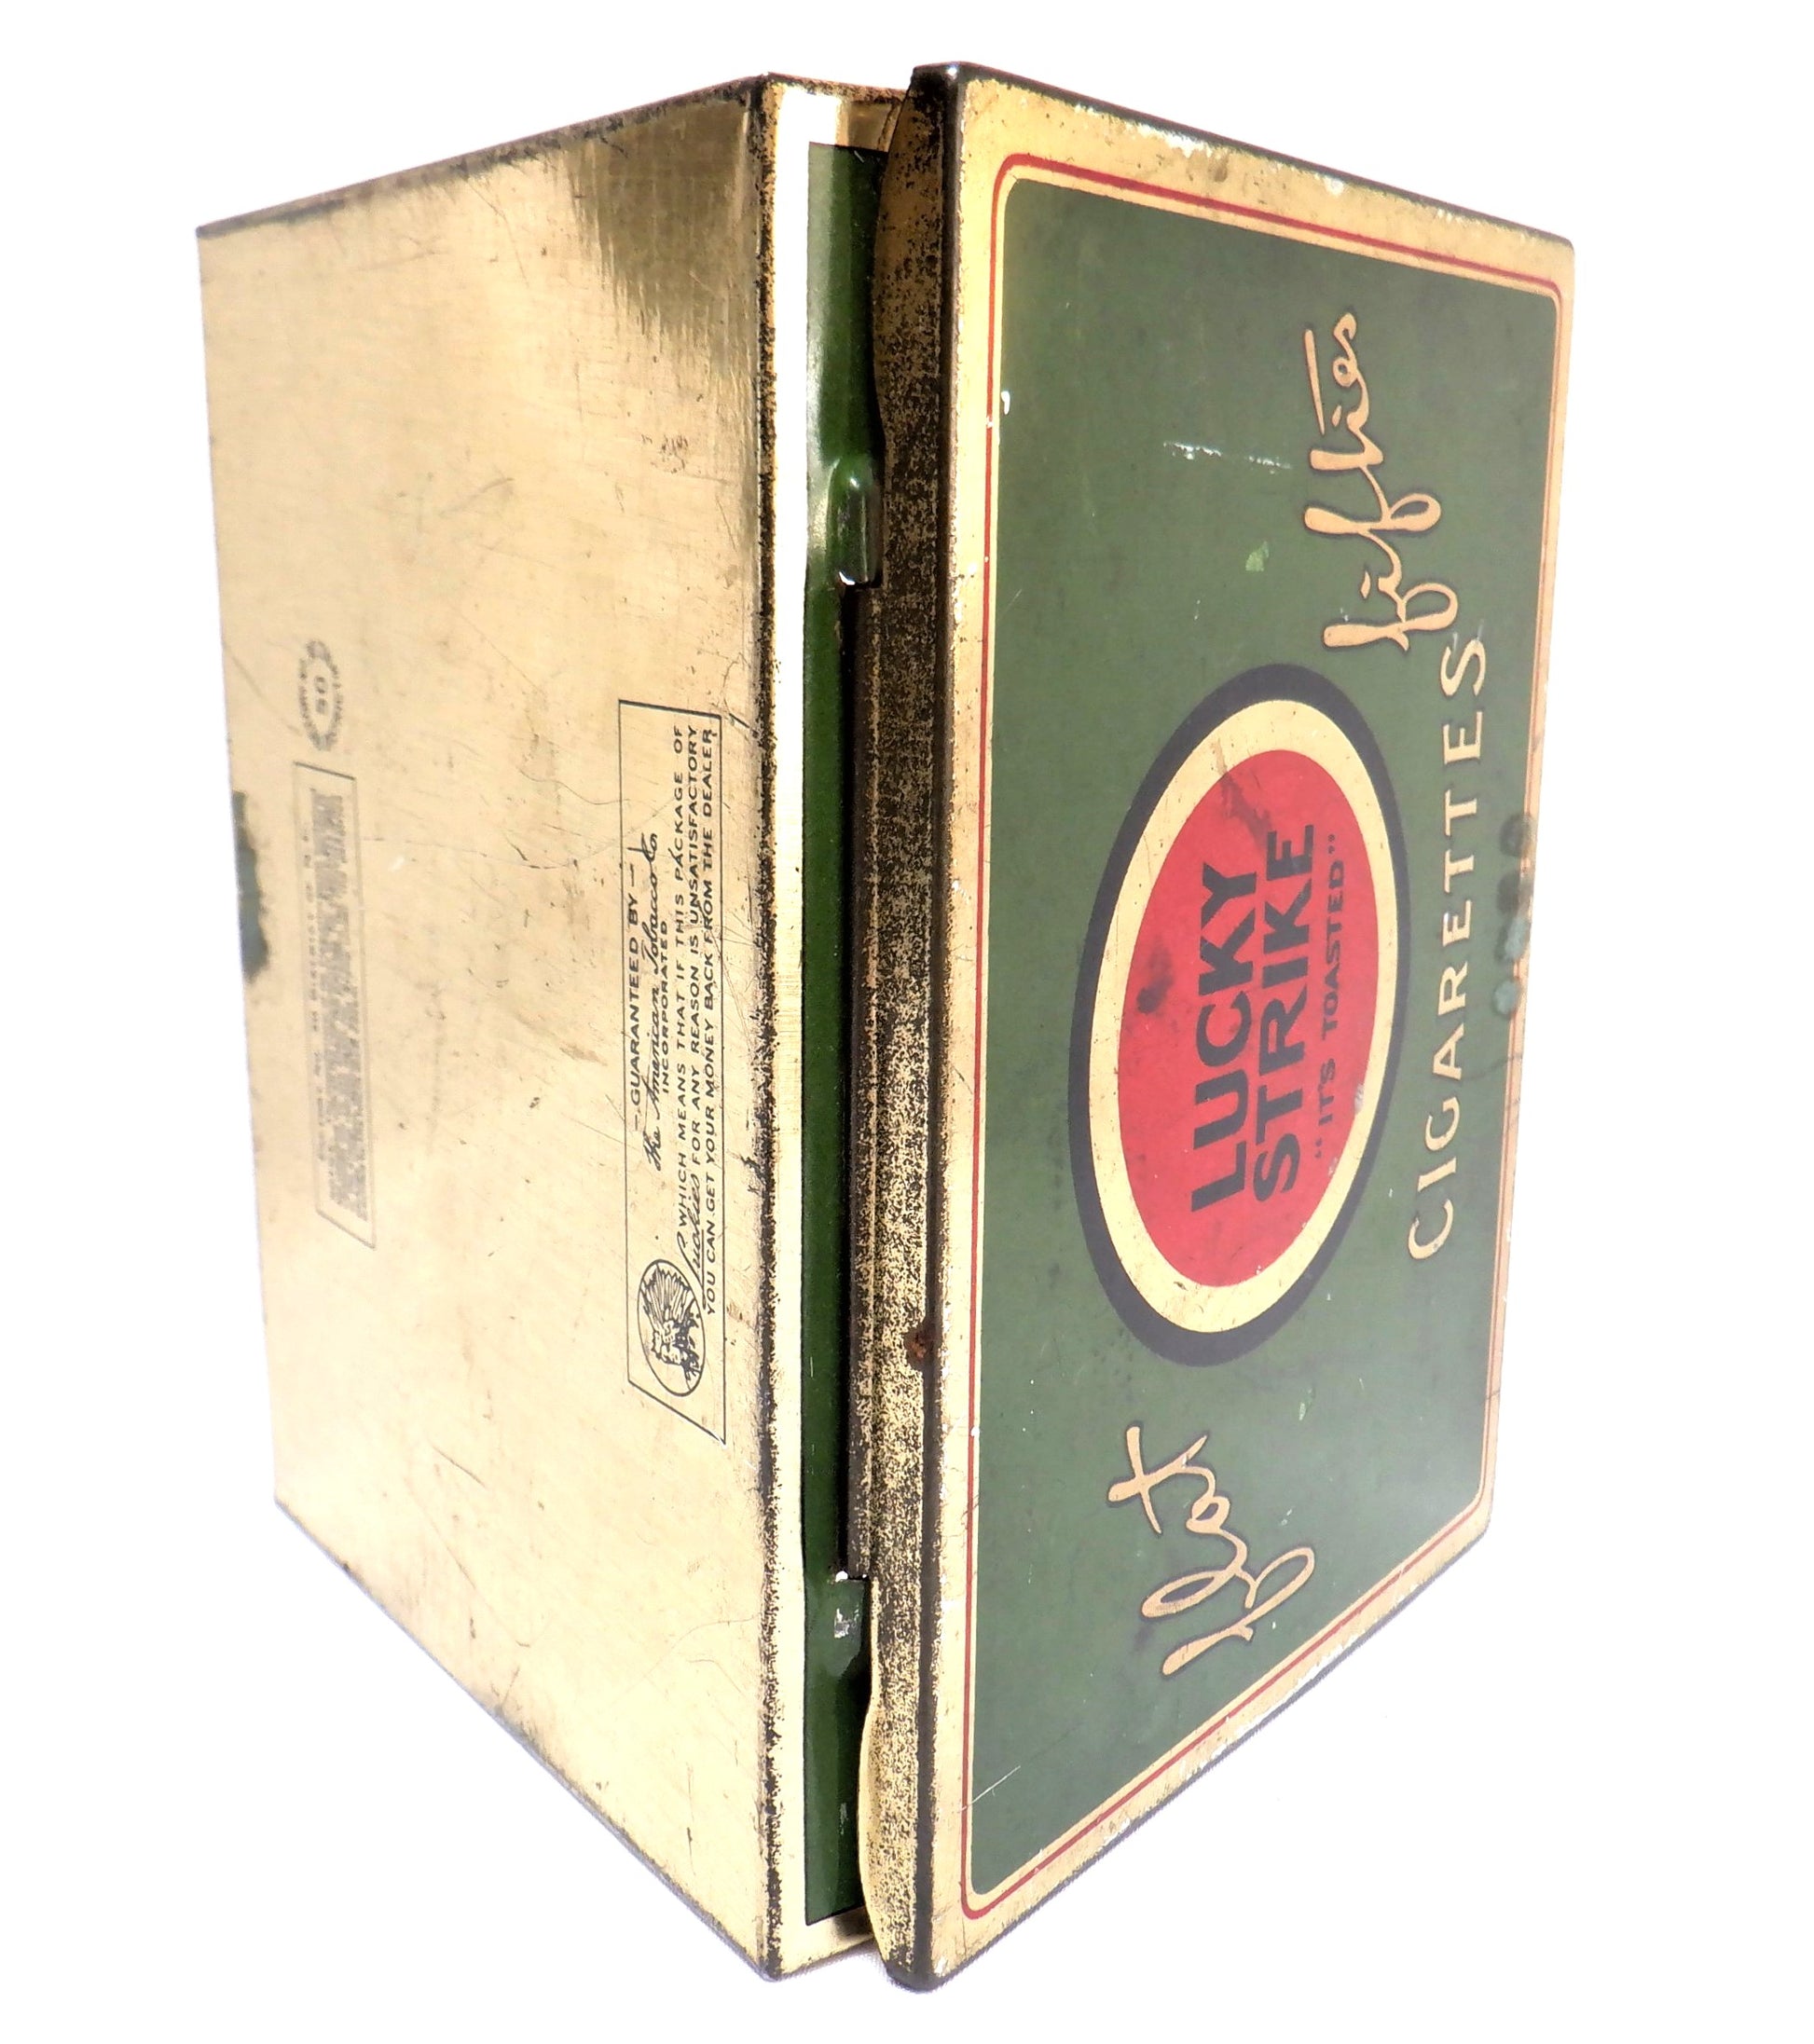 LUCKY STRIKE, It's Toasted FLAT FIFTIES CIGARETTES Vintage Tin